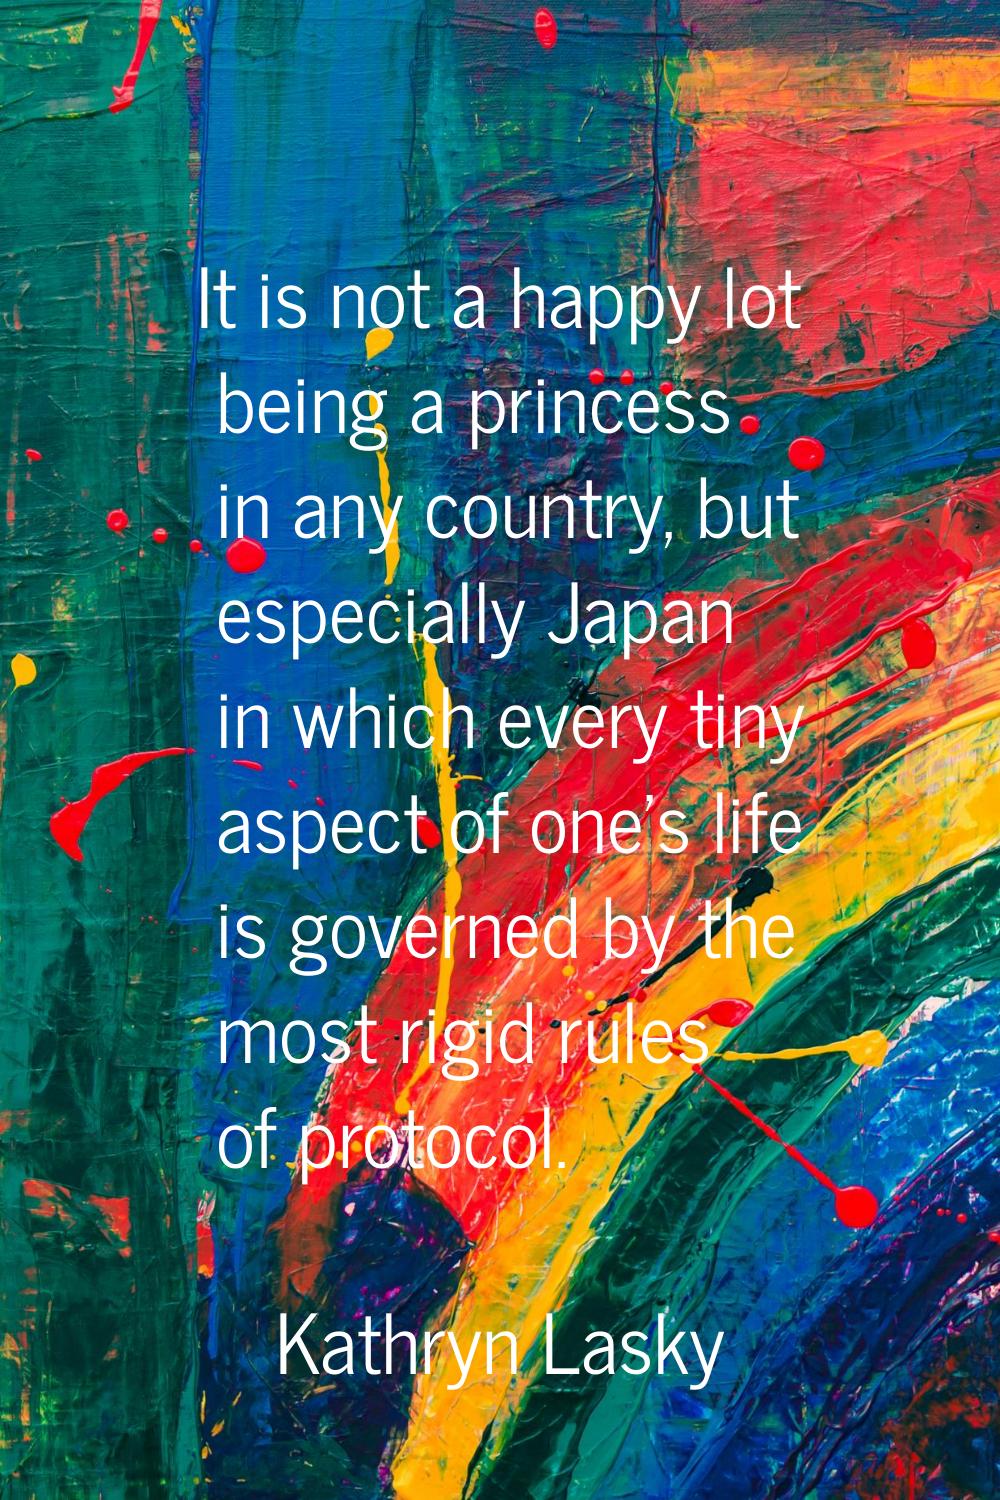 It is not a happy lot being a princess in any country, but especially Japan in which every tiny asp